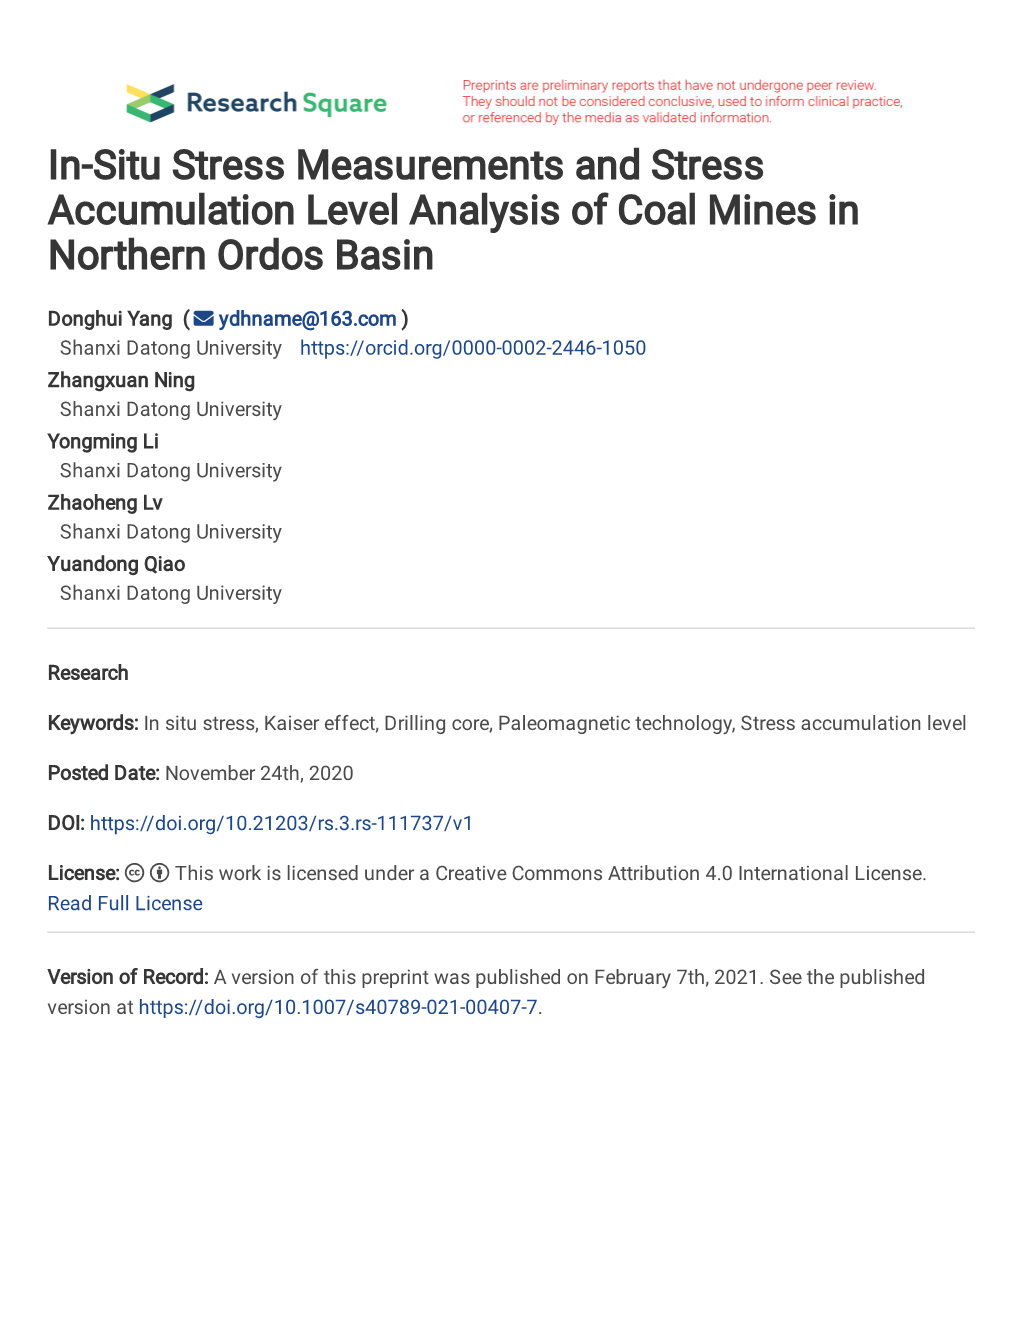 In-Situ Stress Measurements and Stress Accumulation Level Analysis of Coal Mines in Northern Ordos Basin